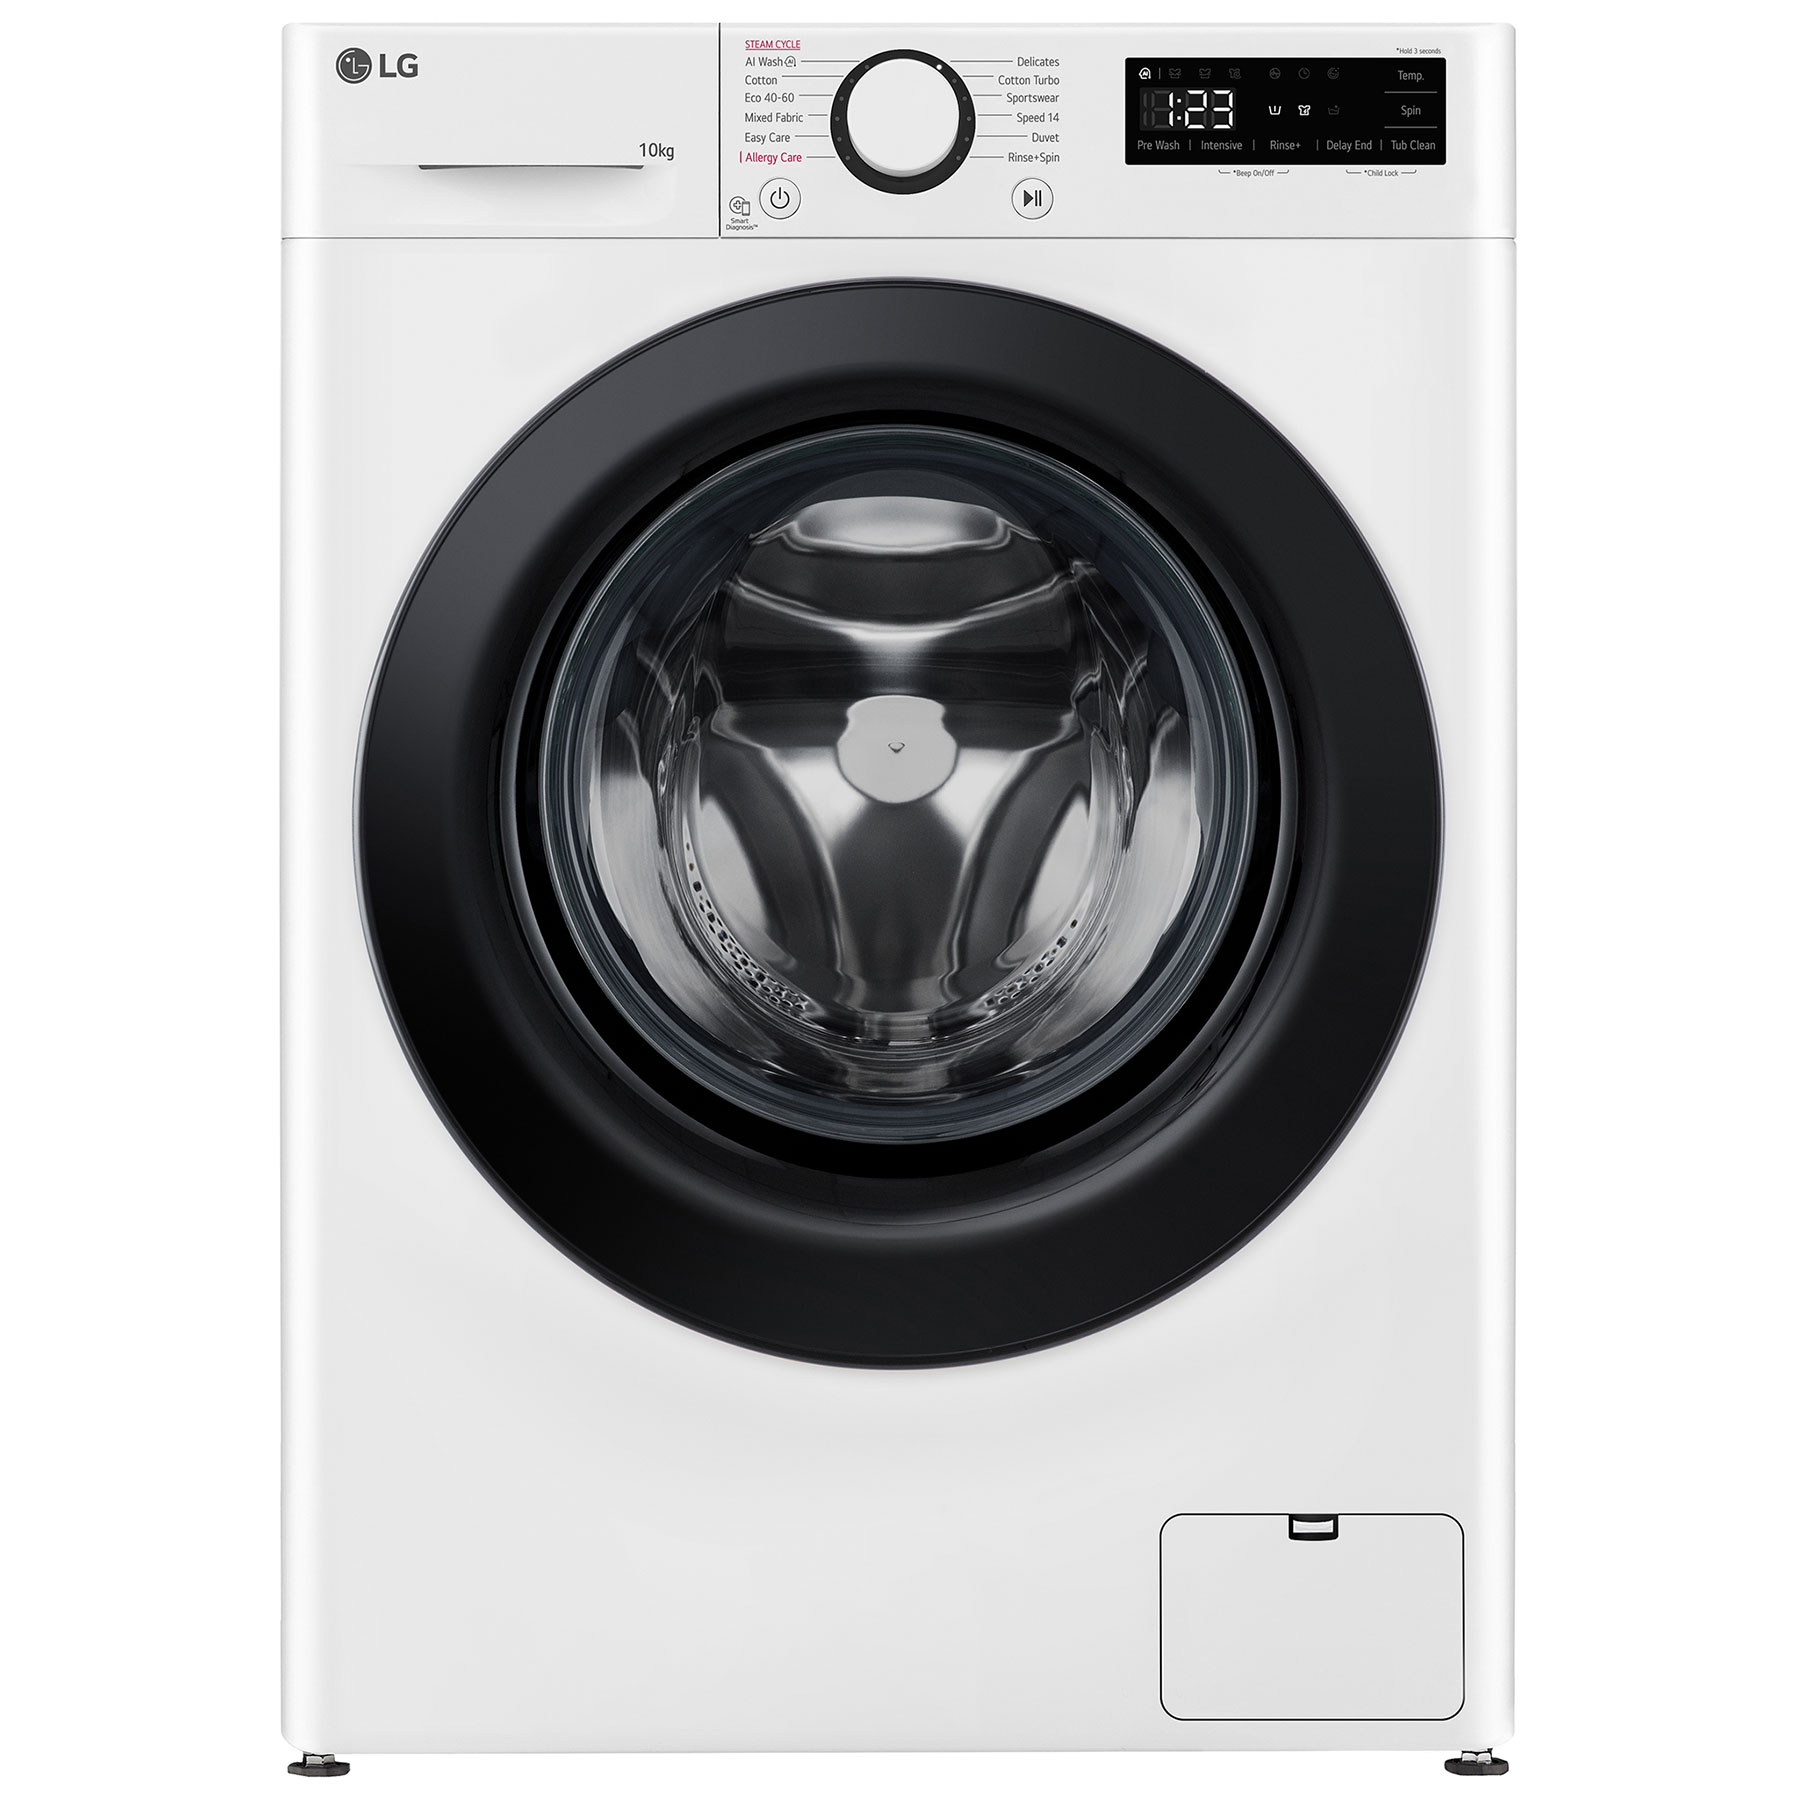 Image of LG F4Y510WBLN1 Washing Machine in White 1400rpm 10kg A Rated